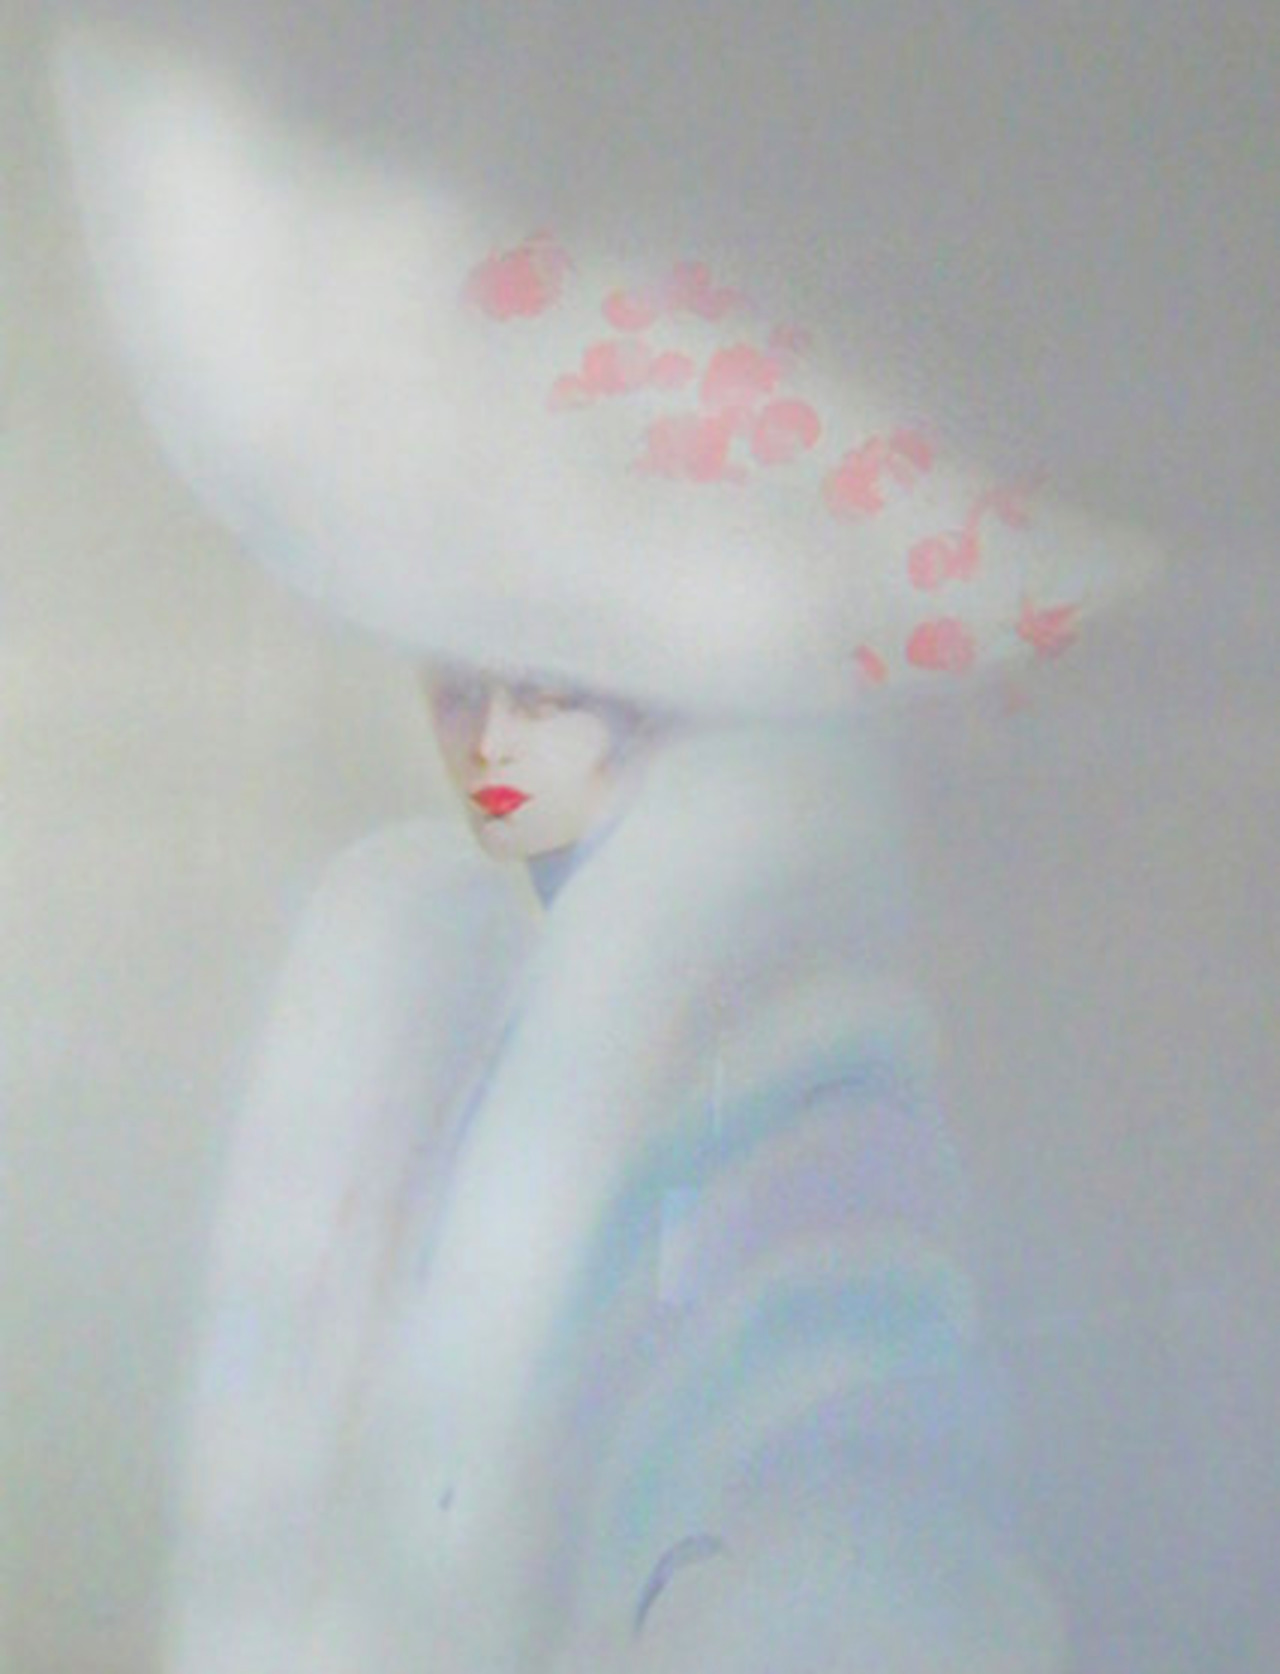 ‘Elegance in White.’ #Painting by Victoria Montesinos #art 
http://artbrokerage.com/Victoria-Monte… http://t.co/WD3PcTx8KA